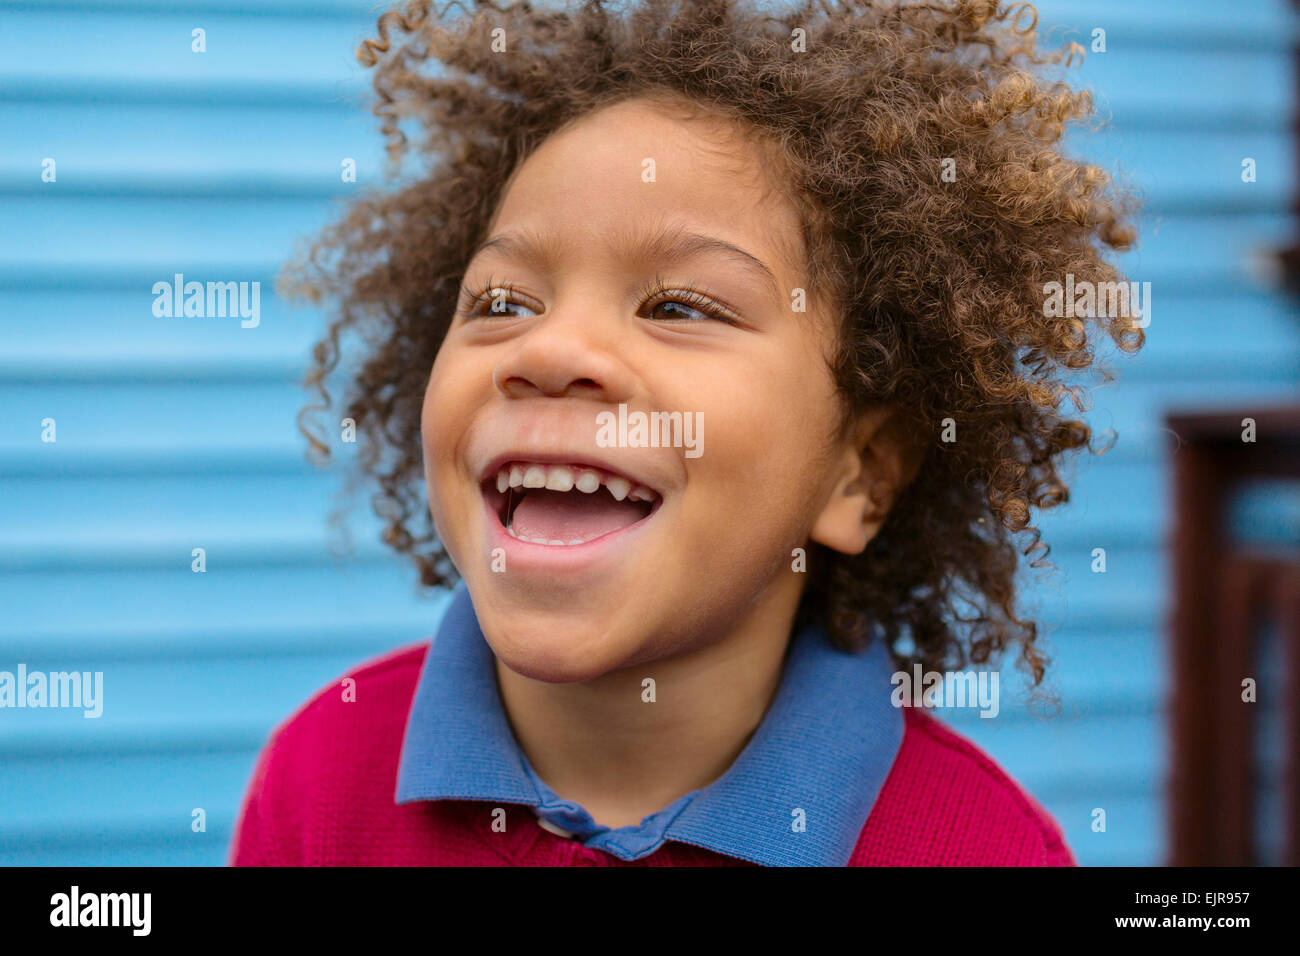 Pacific Islander boy laughing outdoors Stock Photo